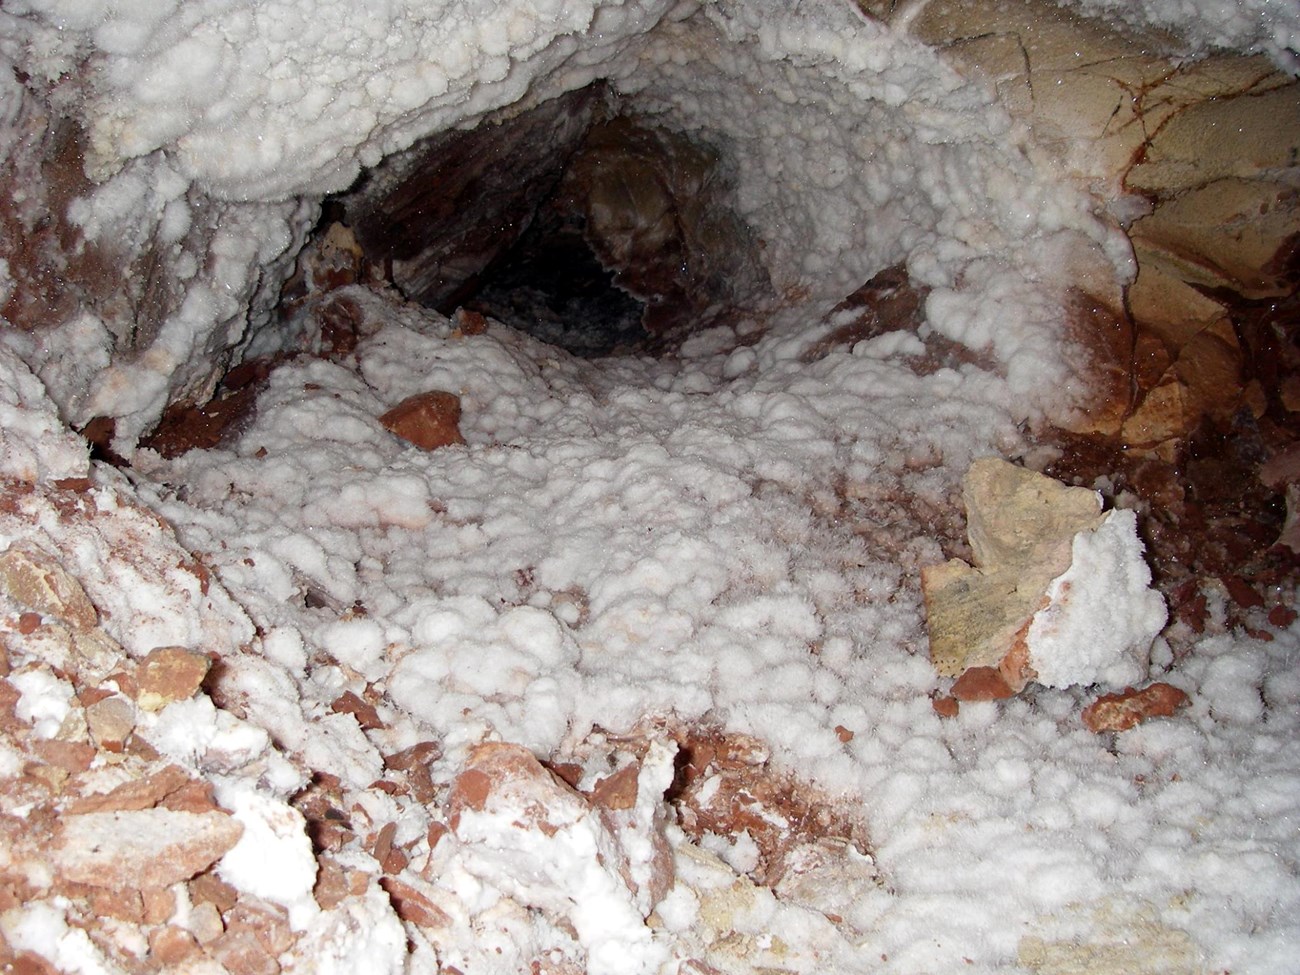 white deposits coating cave surfaces